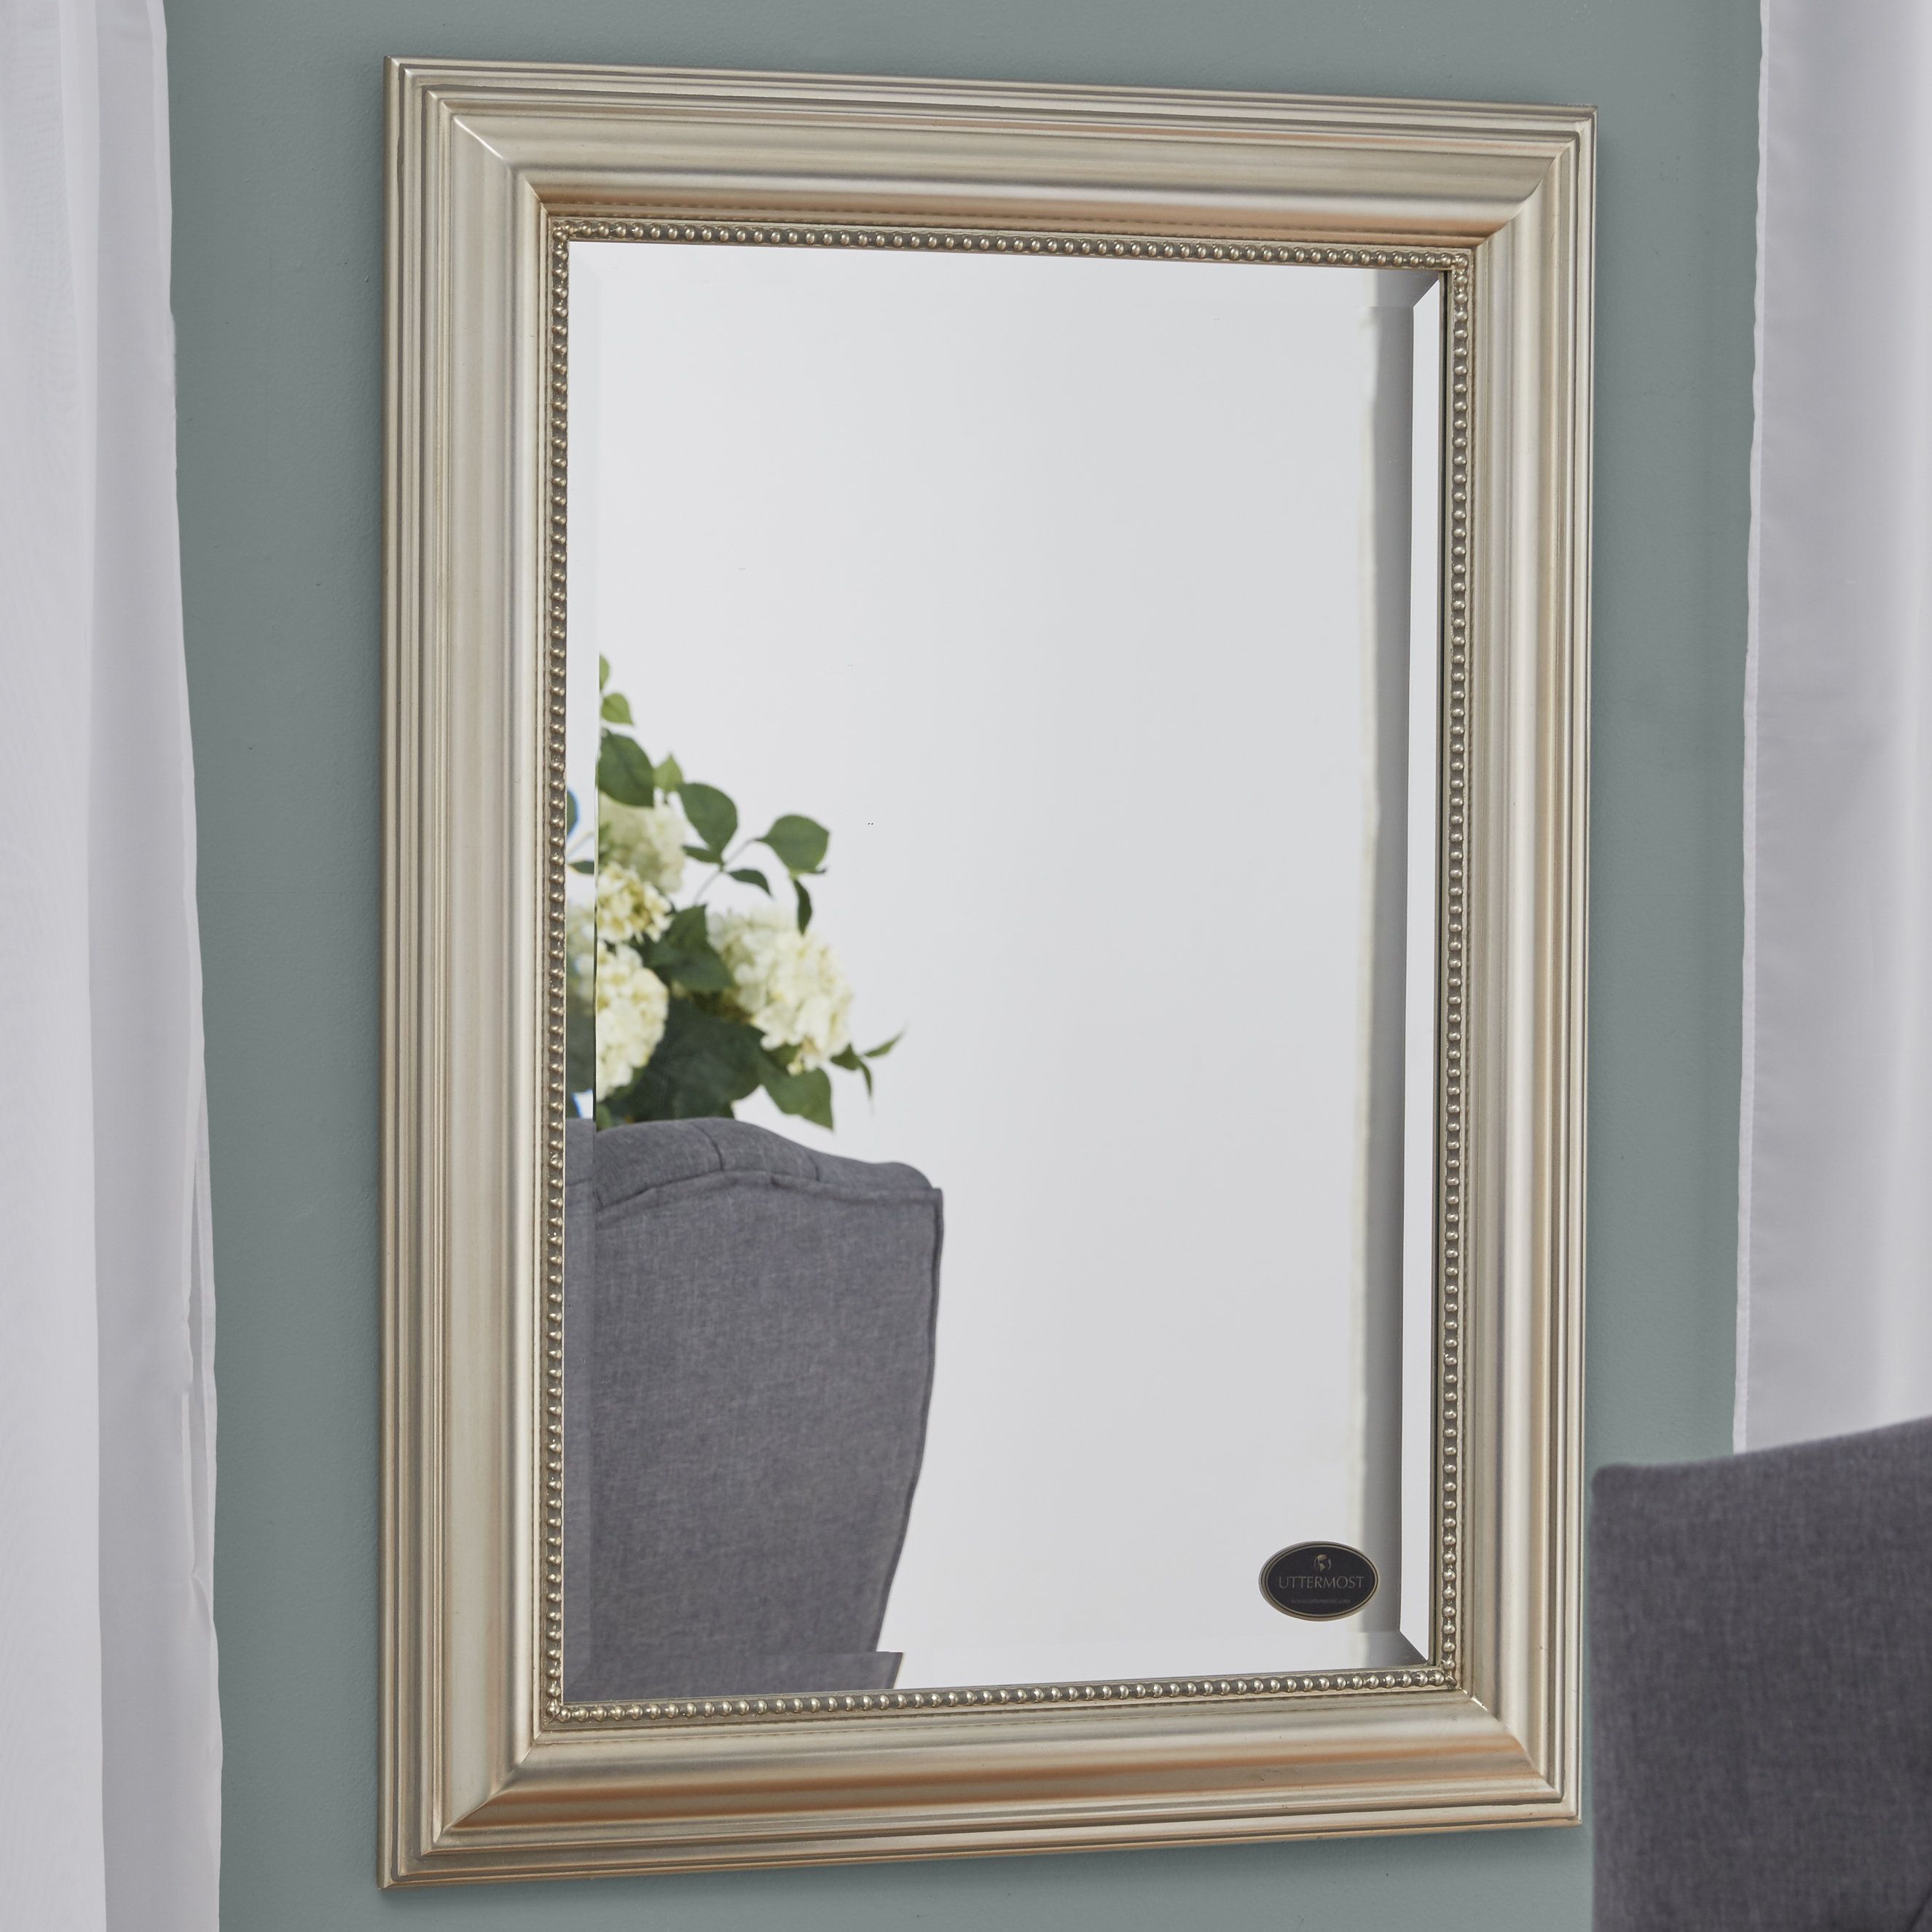 Owens Accent Mirror Pertaining To Owens Accent Mirrors (View 1 of 20)